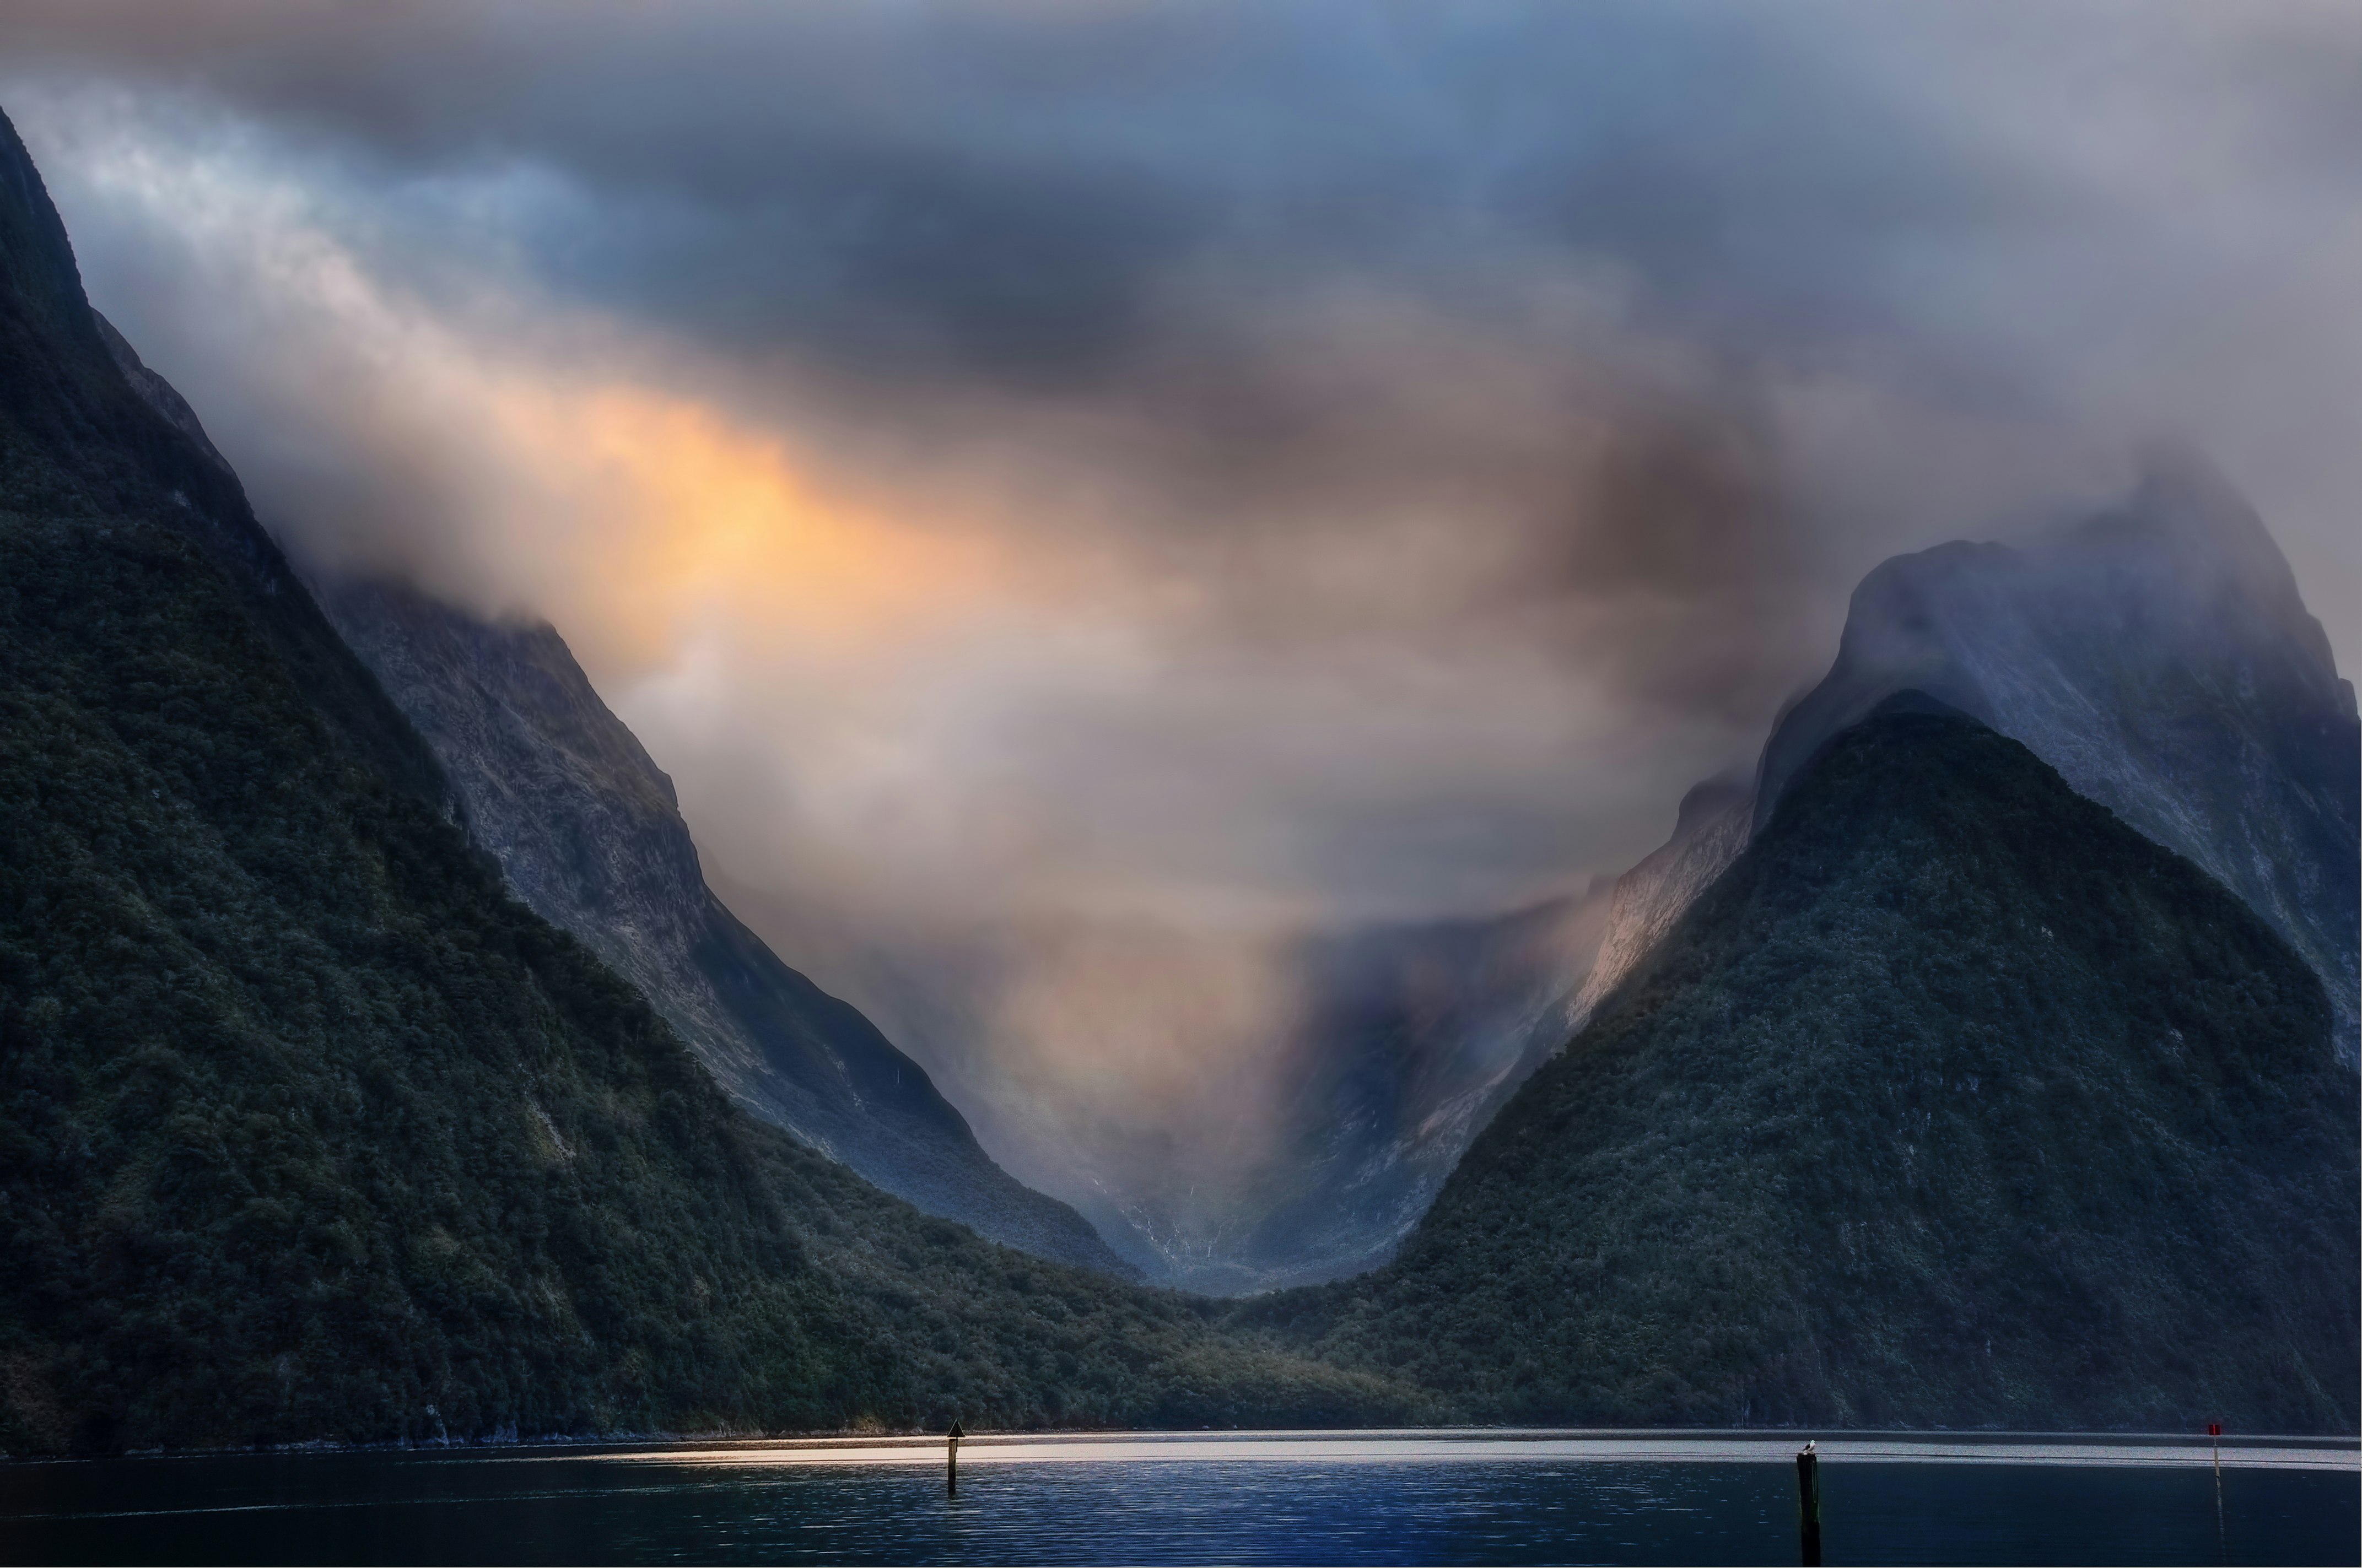 Taken in Milford Sound, New Zealand.   This was taken late in the afternoon on a rain-free day.